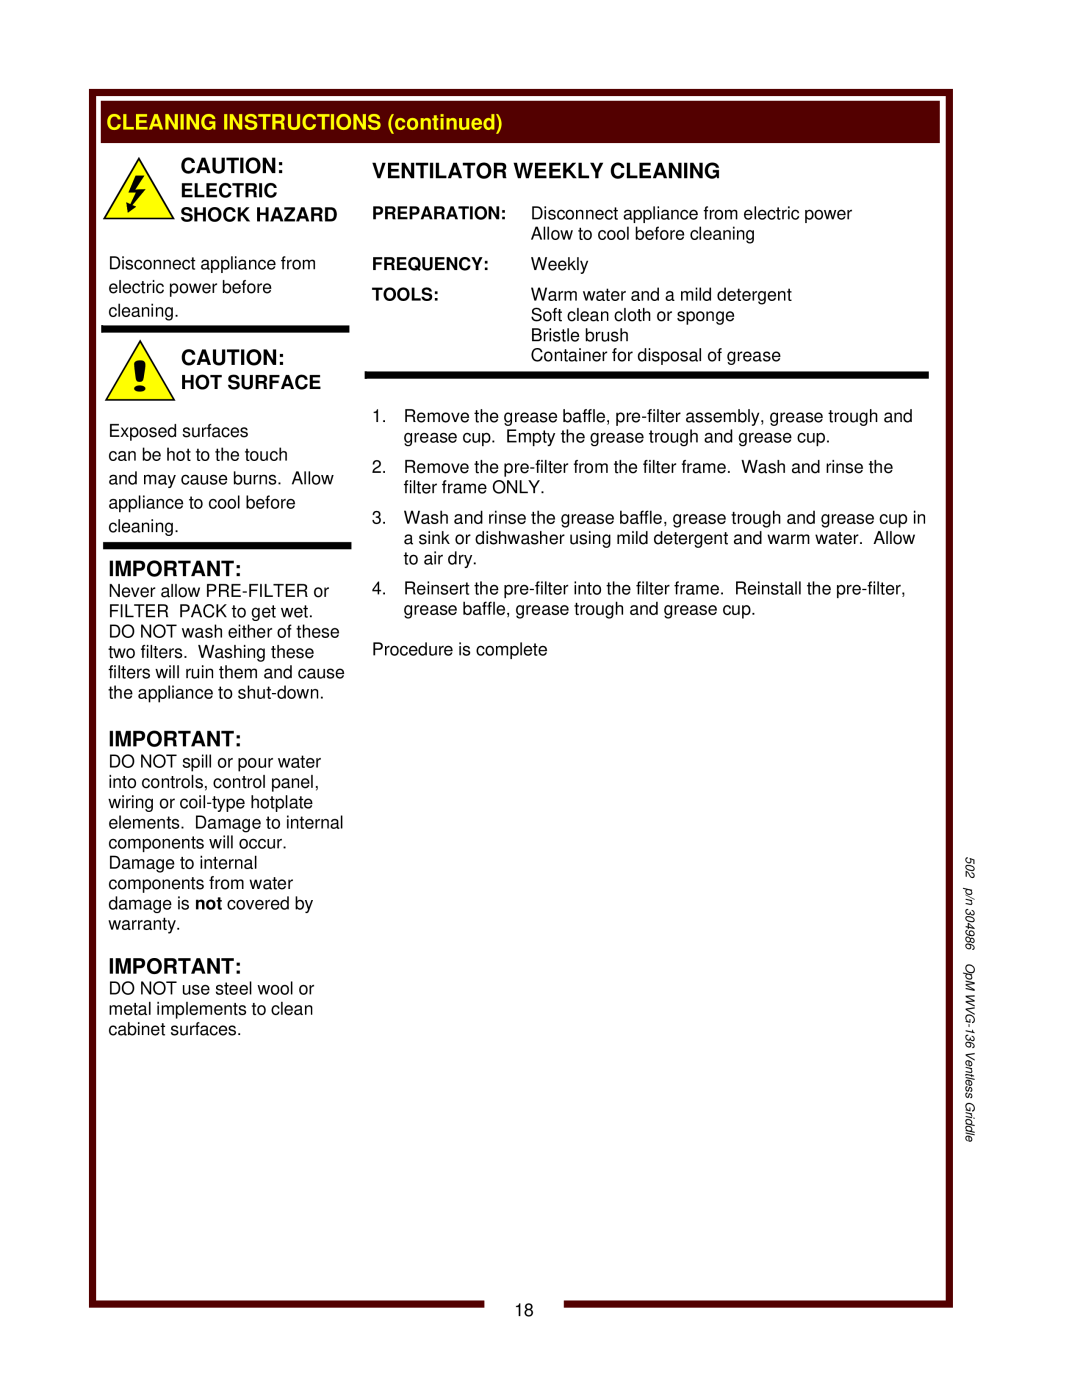 Bloomfield WVG-136RW CLEANING INSTRUCTIONS continued, Ventilator Weekly Cleaning, FREQUENCY Weekly, Electric Shock Hazard 